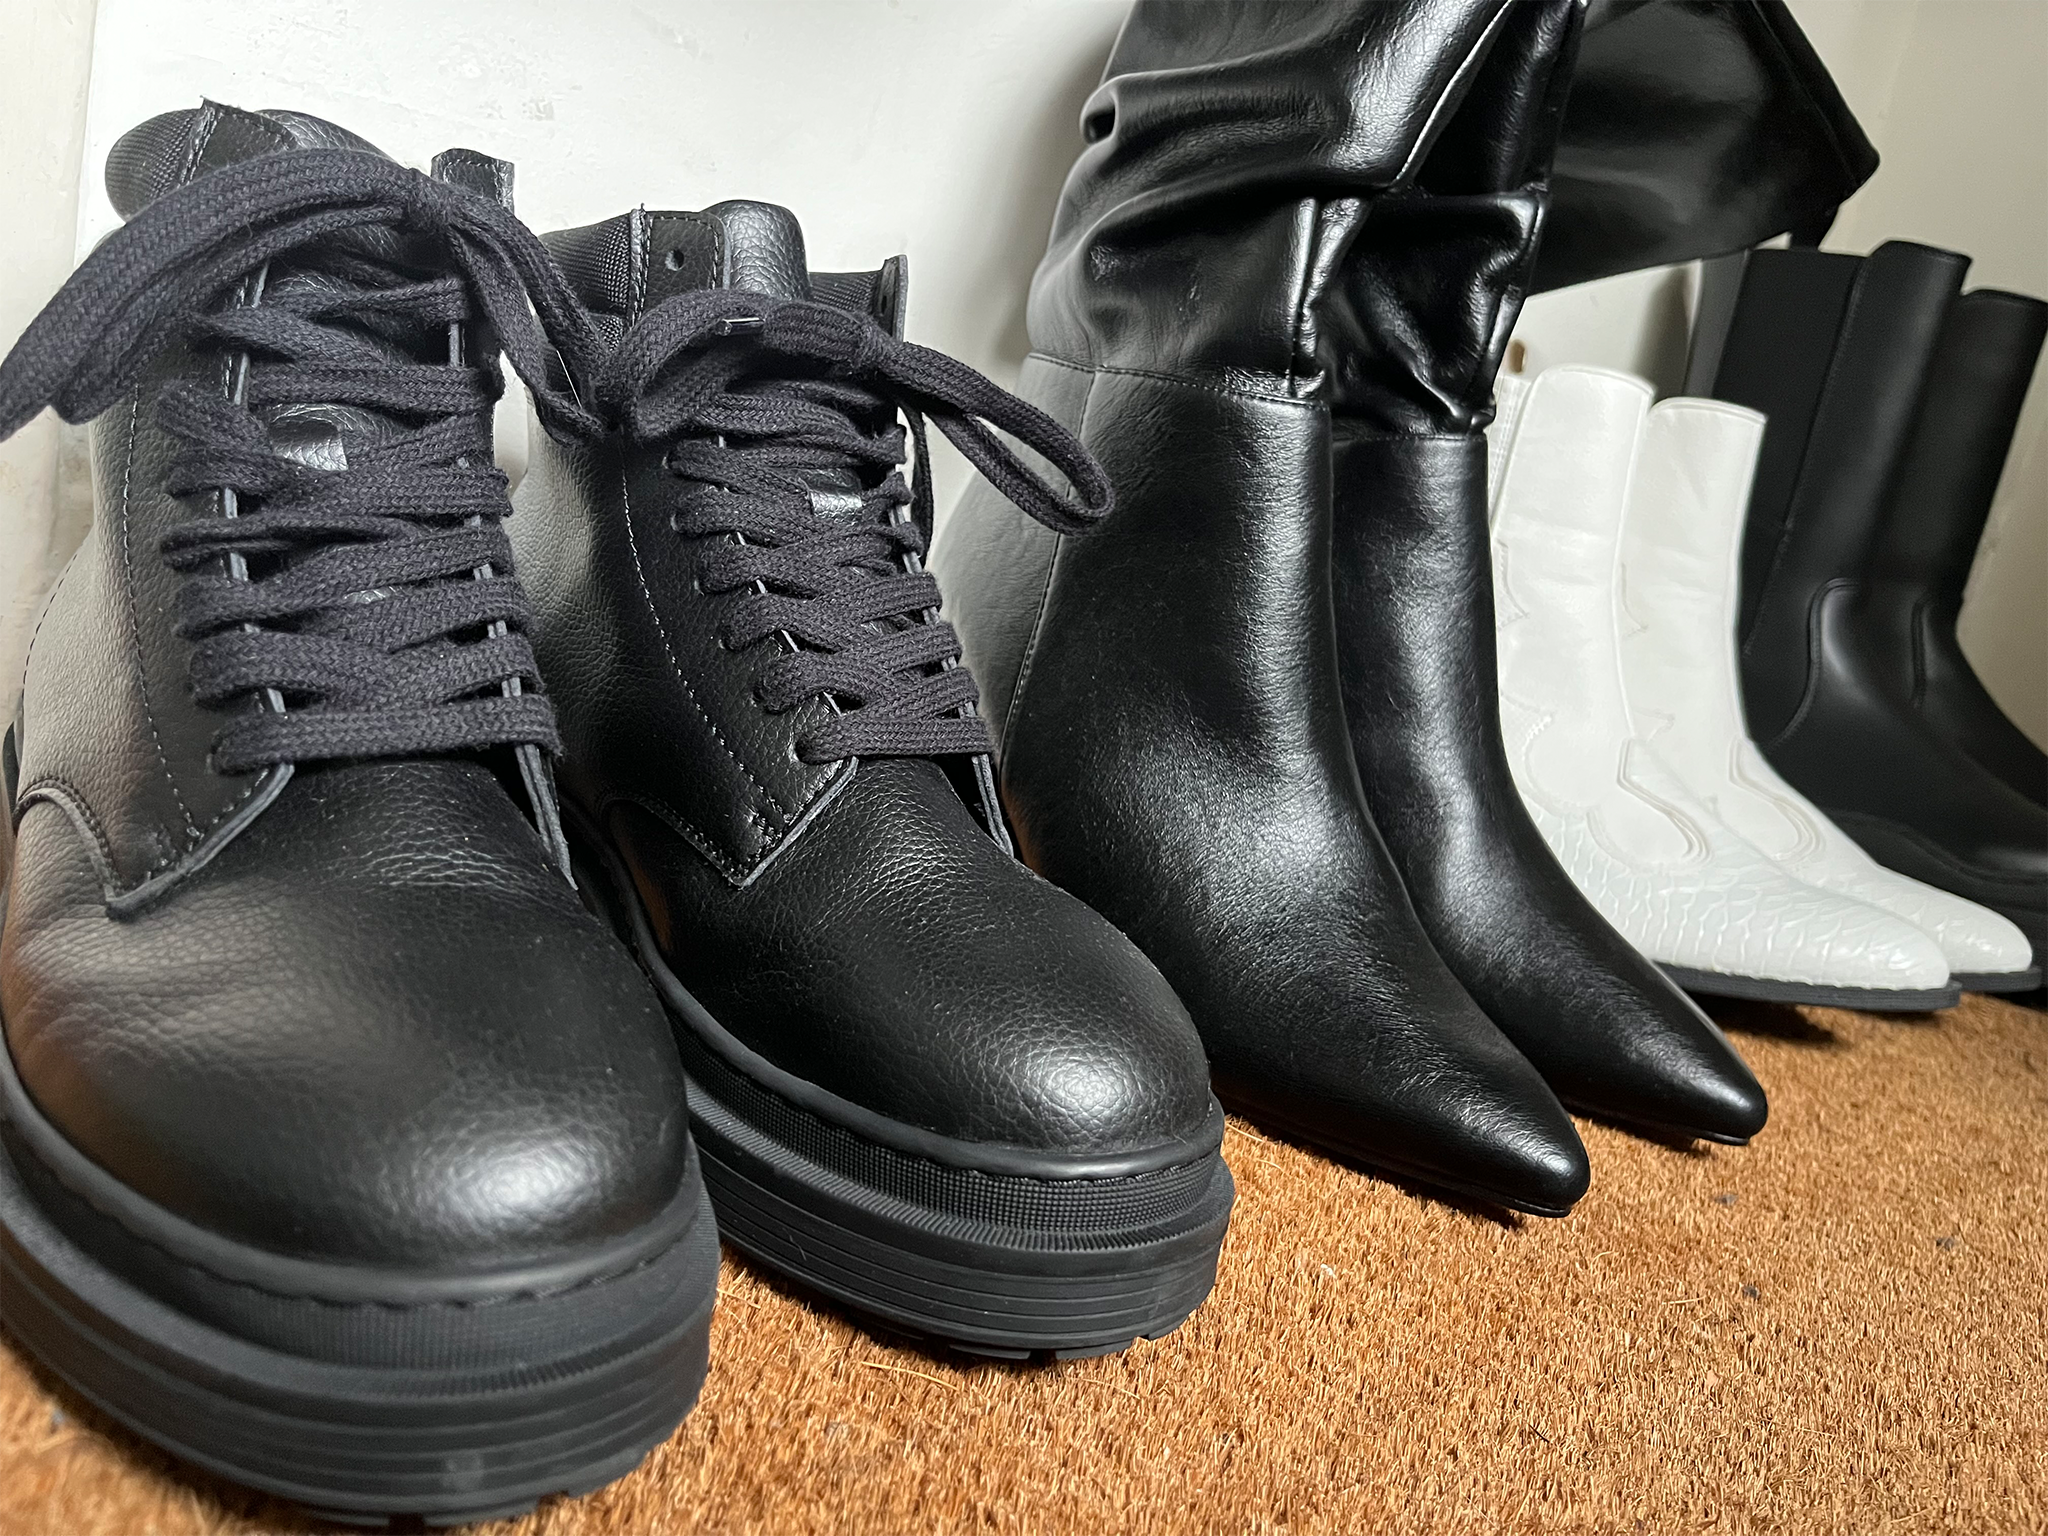 A selection of the boots we tested for this review